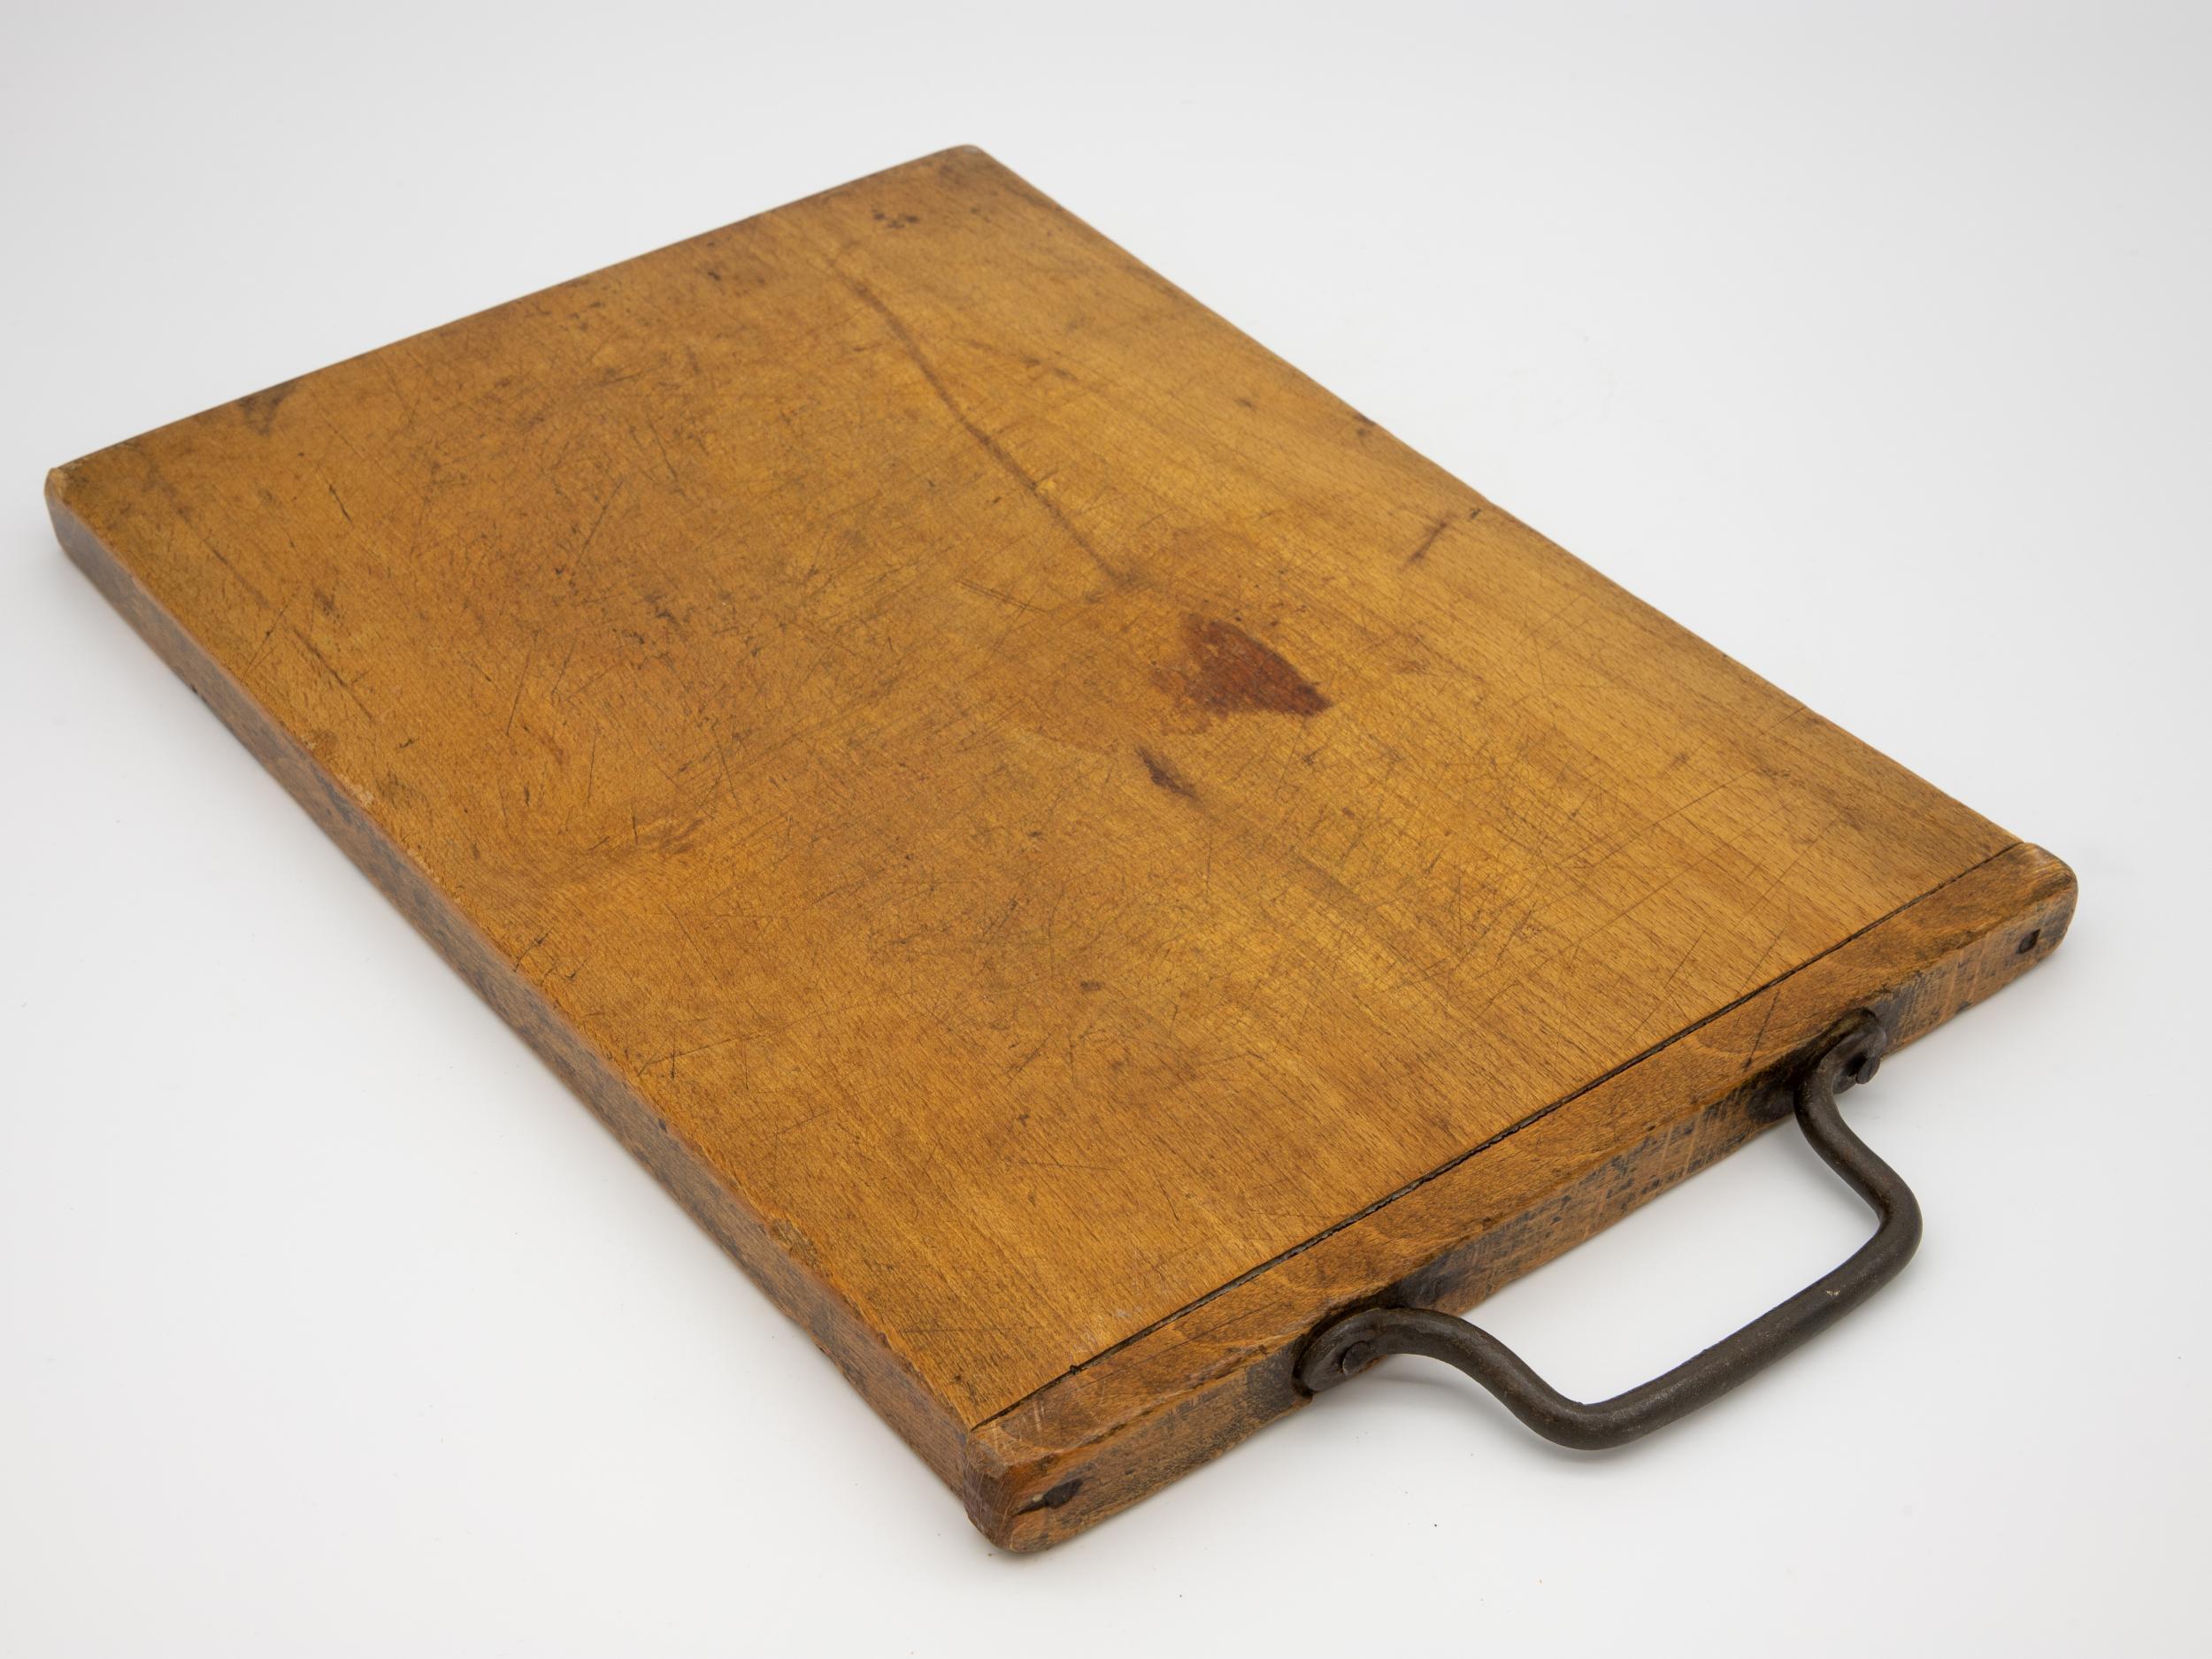 Antique chopping board with metal handle, circa 1900. Wear consistent with age and use.